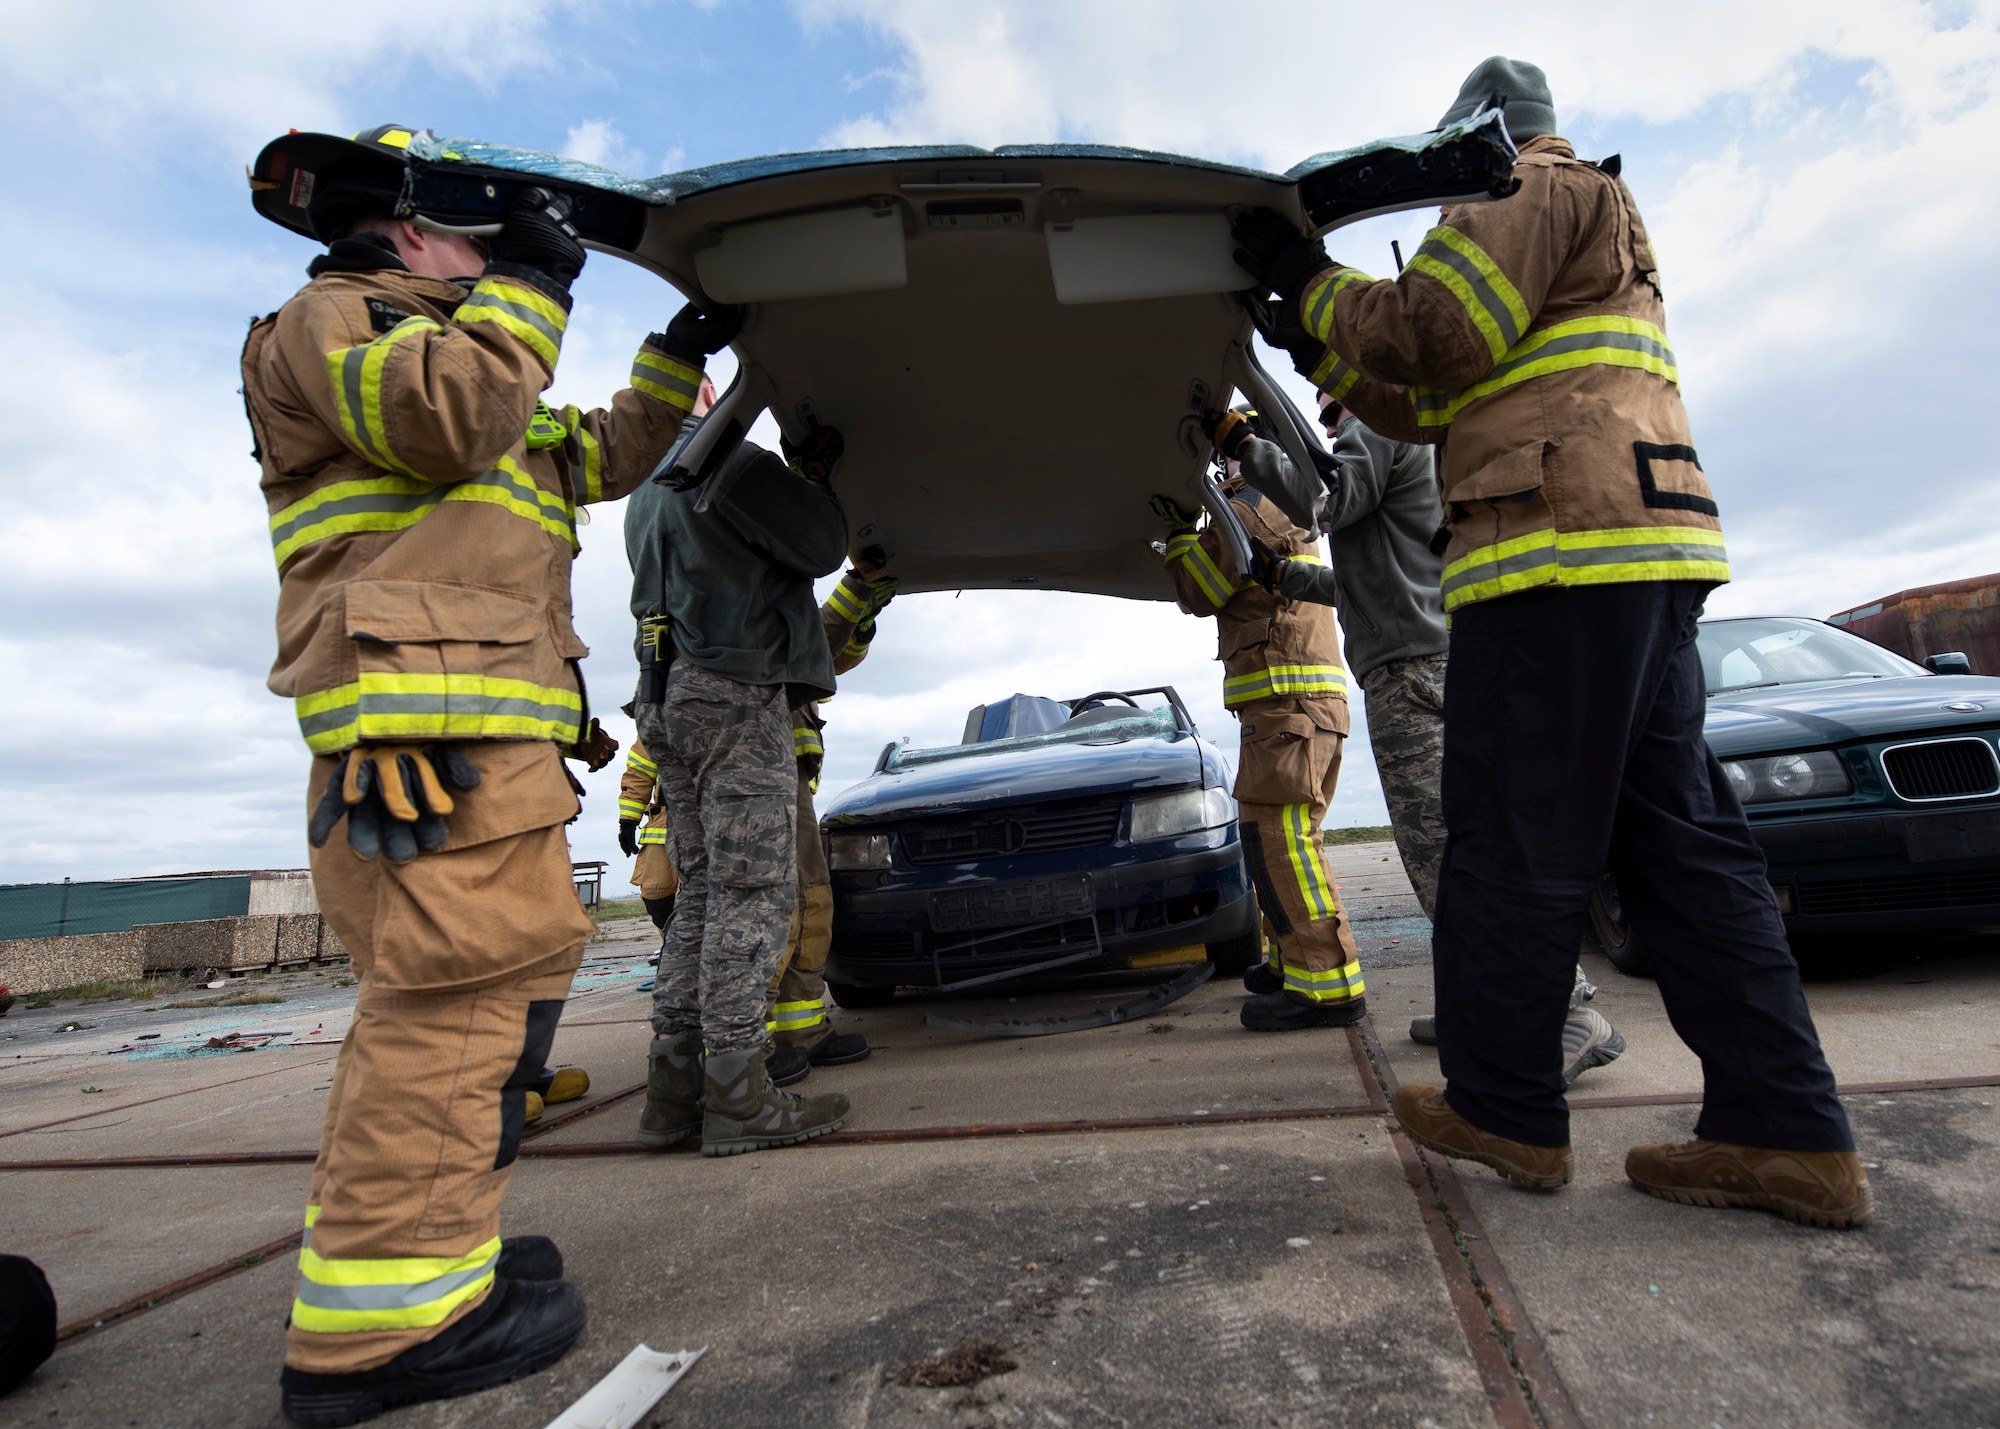 U.S. Air Force firefighters assigned to the 52nd Civil Engineer Squadron conclude a vehicle extrication exercise at Spangdahlem Air Base, Germany, March 26, 2019. Airmen cut through car glass and posts to simulate how to remove a patient from a car that has been in an incident. The exercise was part of the 52nd CES Fire Department's required training. (U.S. Air Force photo by Airman 1st Class Valerie Seelye)